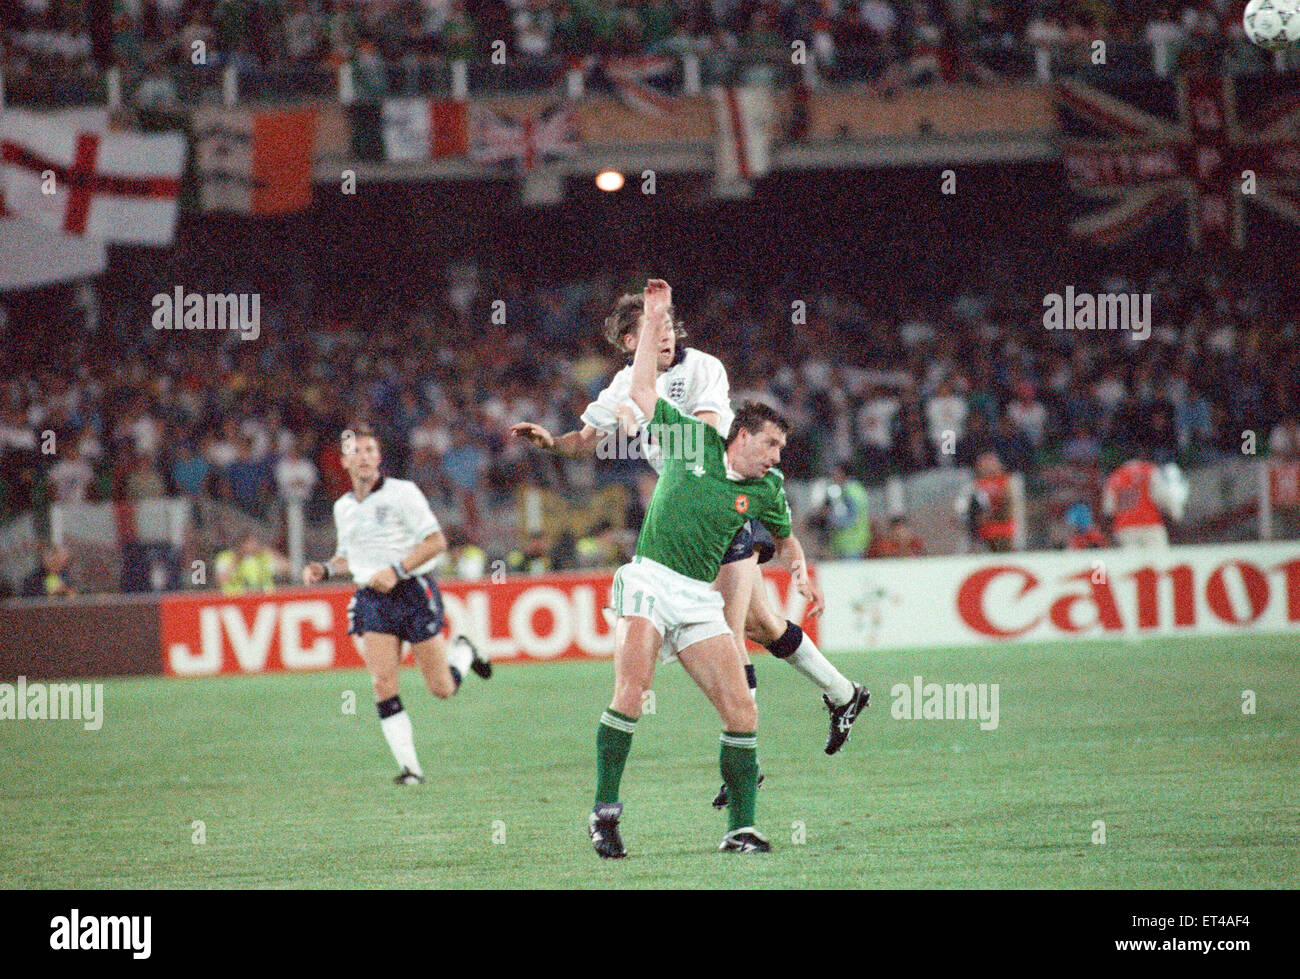 World Cup Group F match at the Stadio Sant'Elia in Cagliari, Italy. England 1 v Republic of Ireland 1. Kevin Sheedy battles for the aerial ball with Chris Waddle. 11th June 1990. Stock Photo